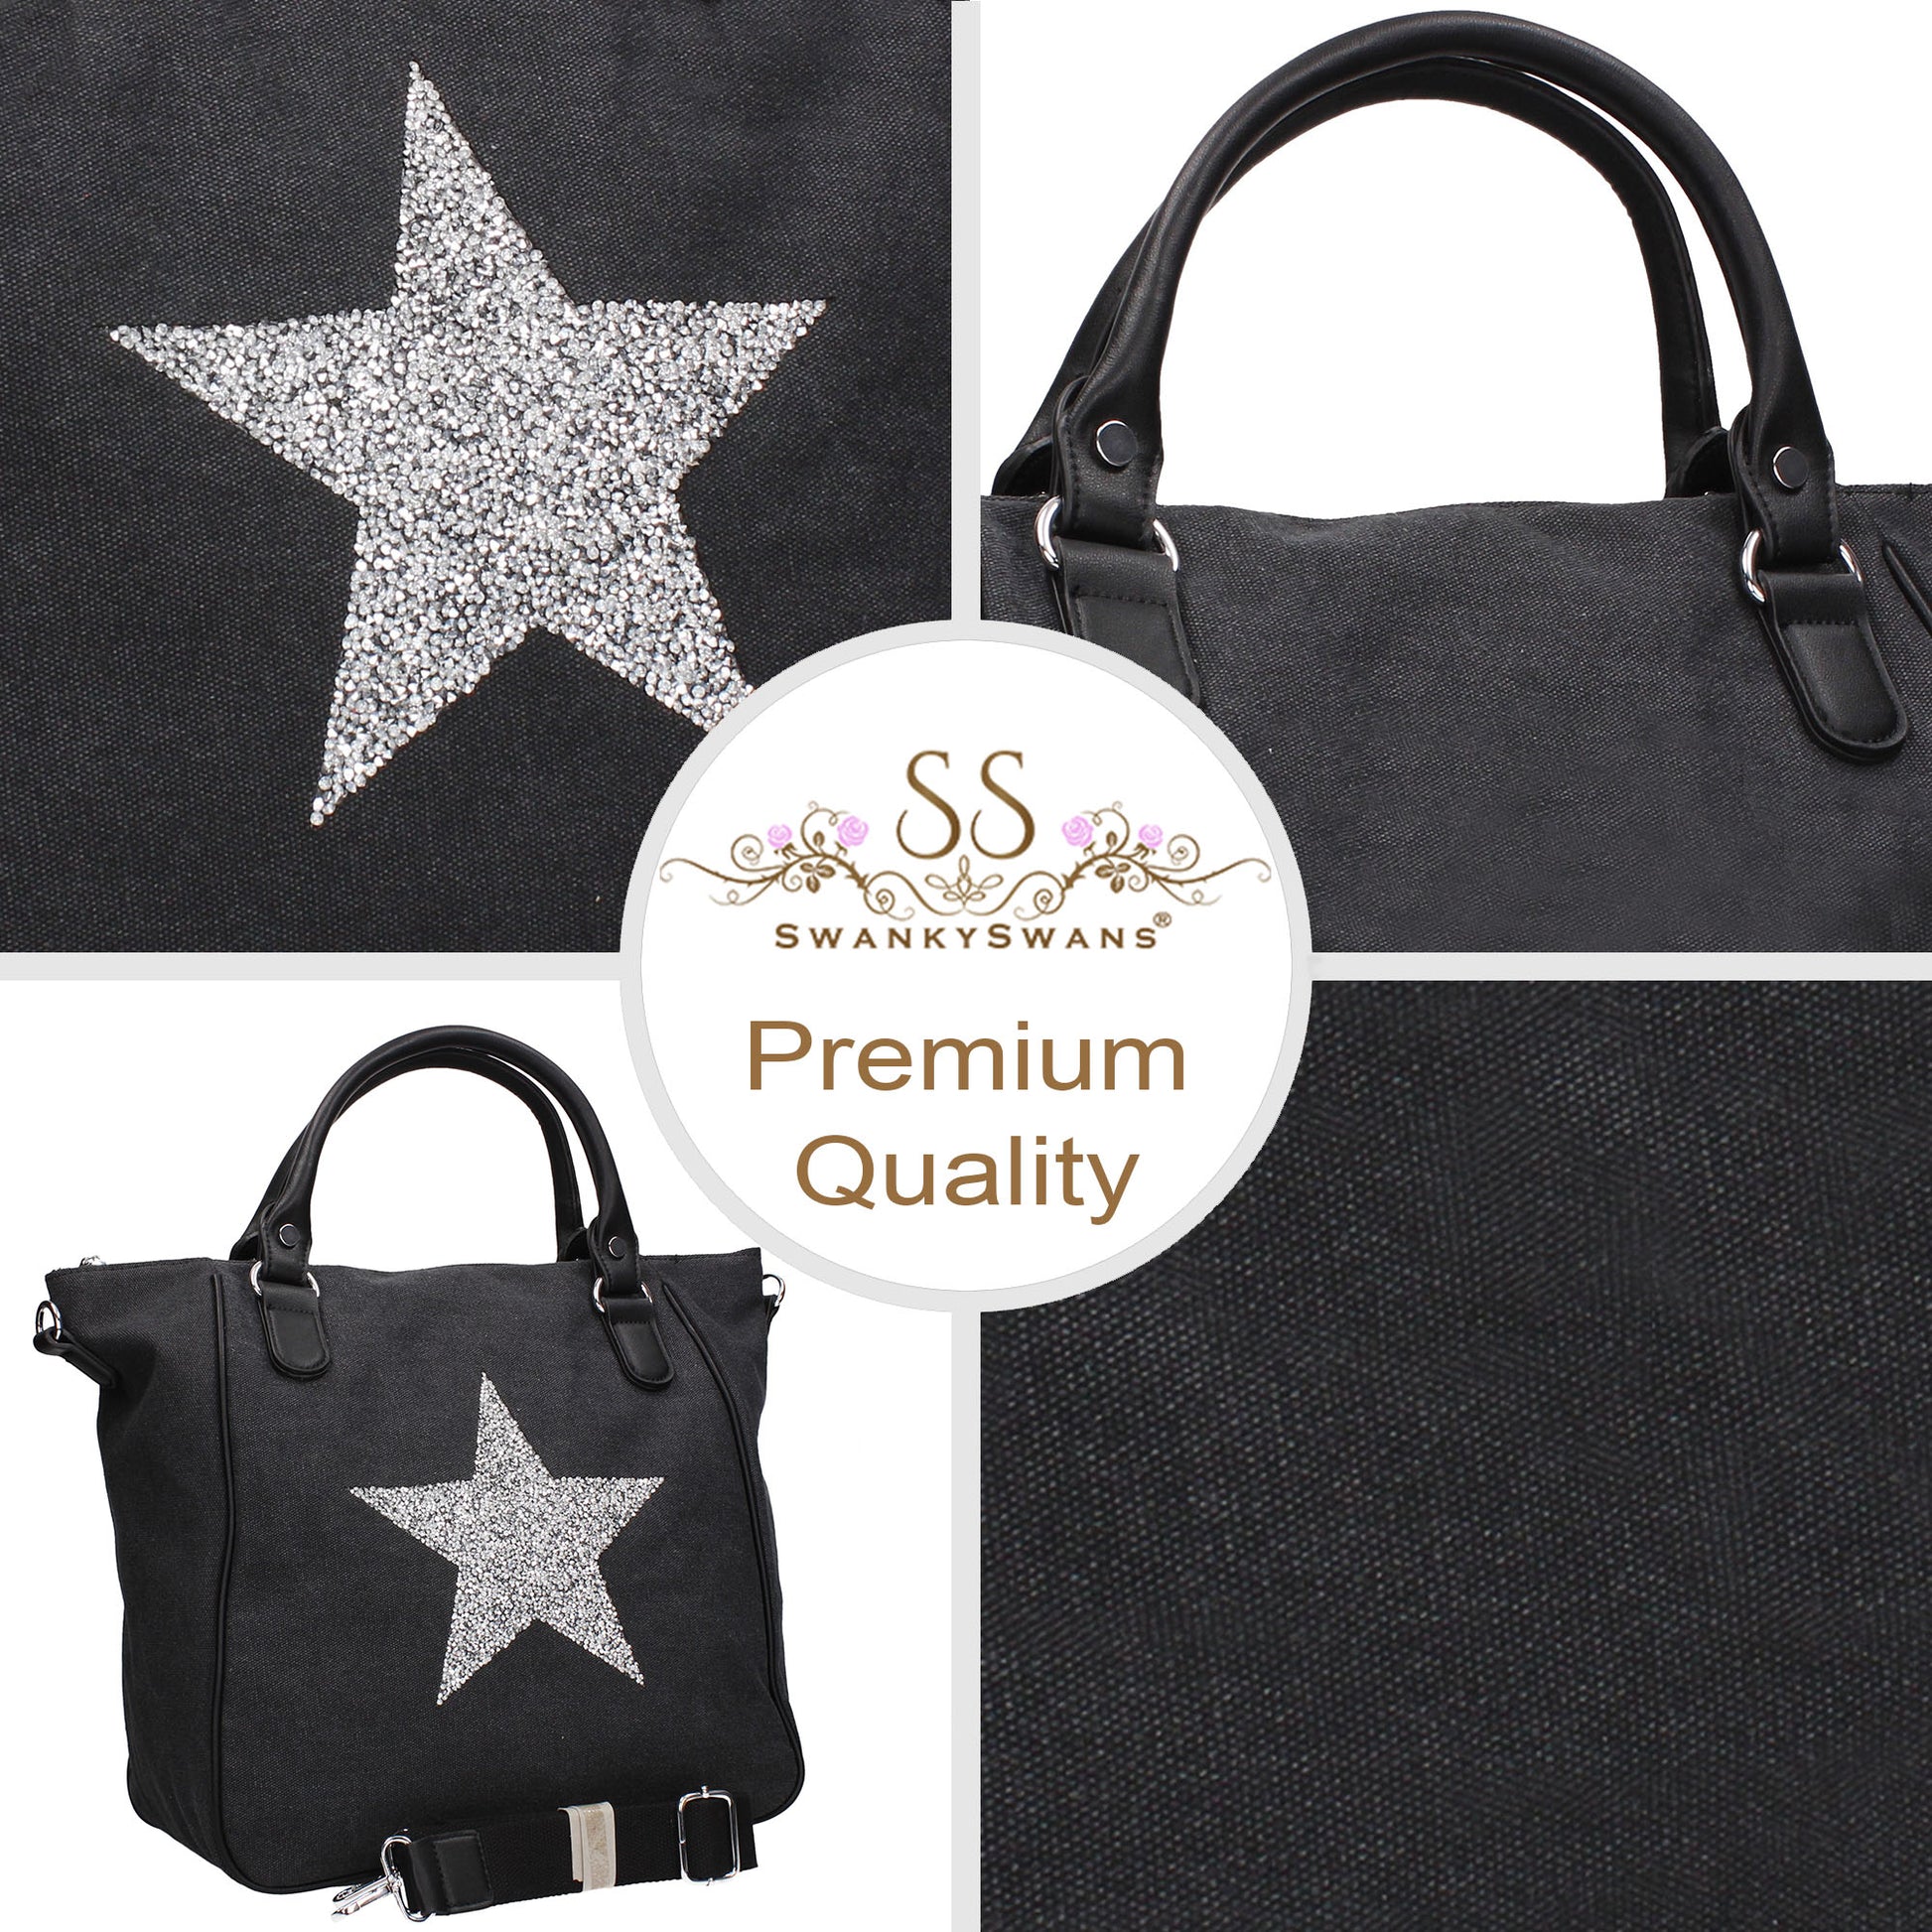 Swanky Swans Sian Handbag BlackPerfect for School, Weddings, Day out!